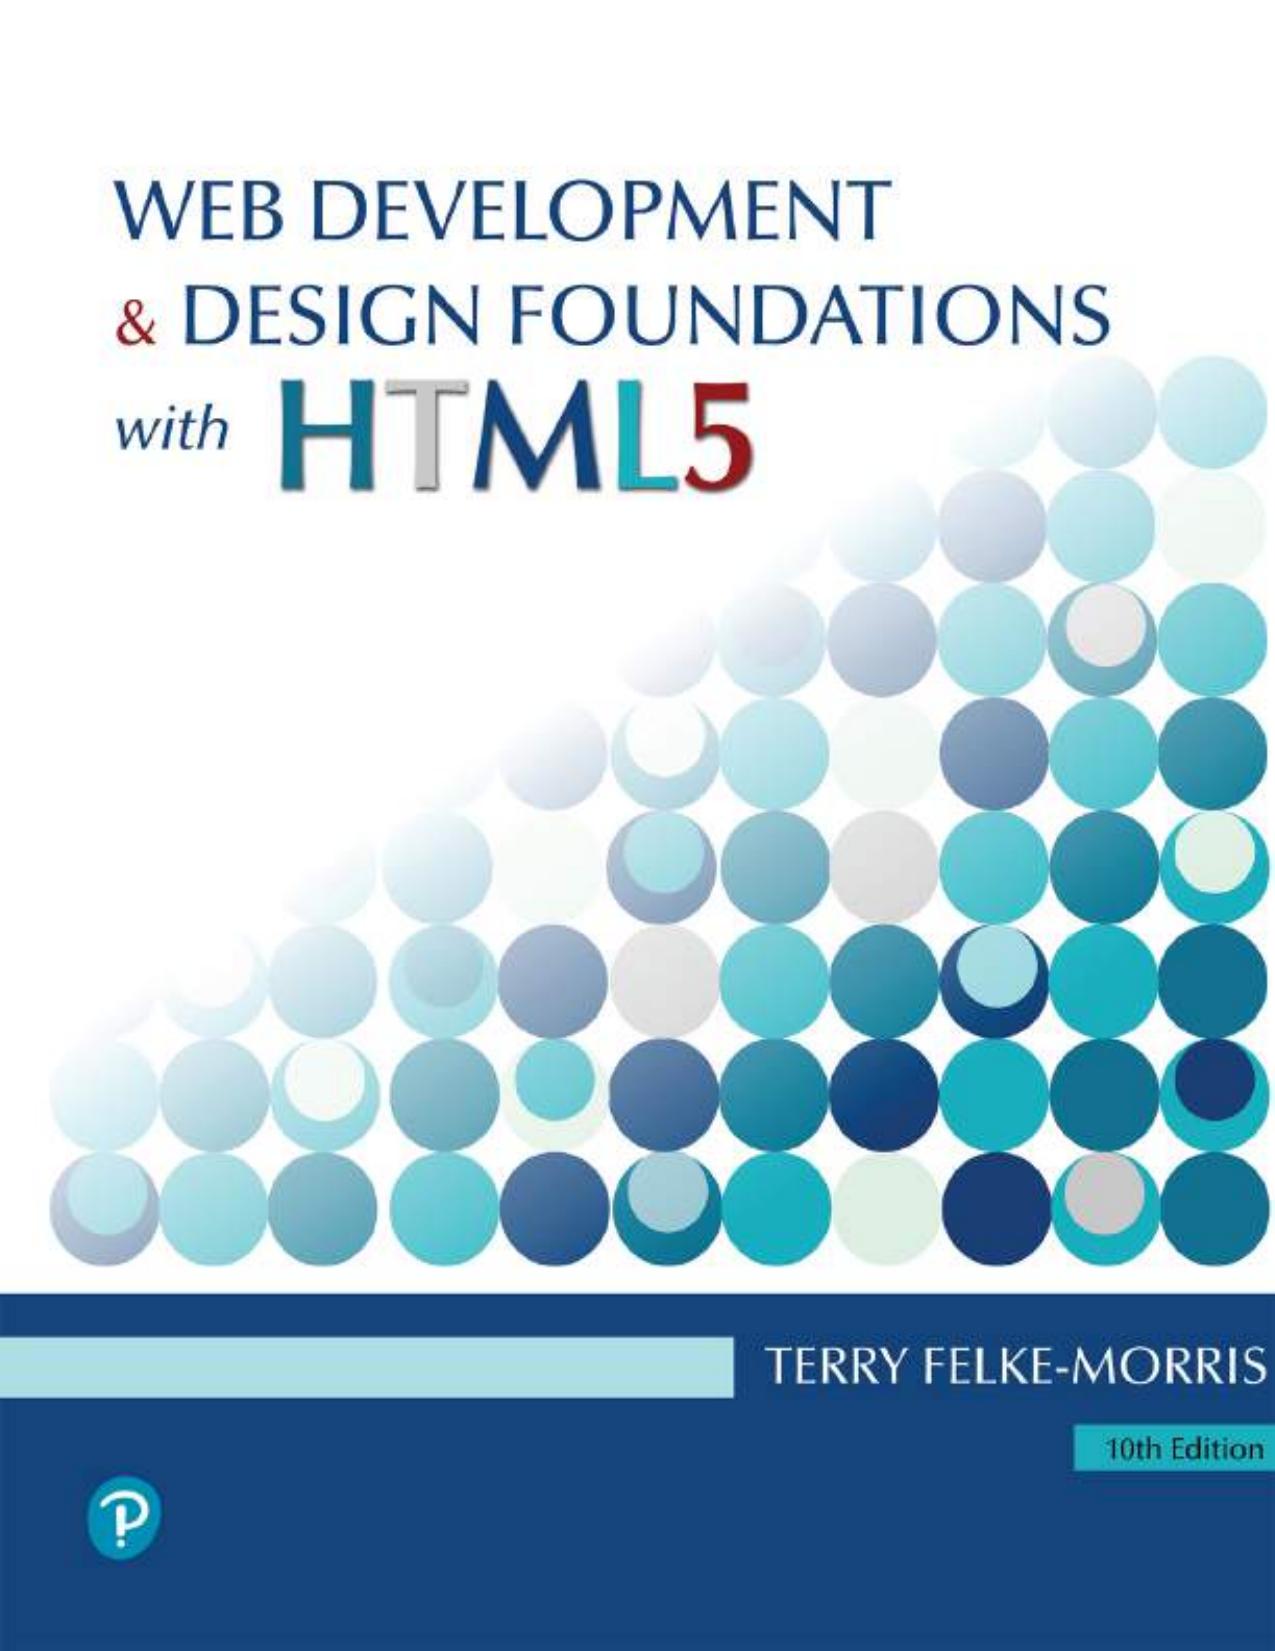 Web Development and Design Foundations with HTML5, 10th edition by Terry Ann Felke-Morris